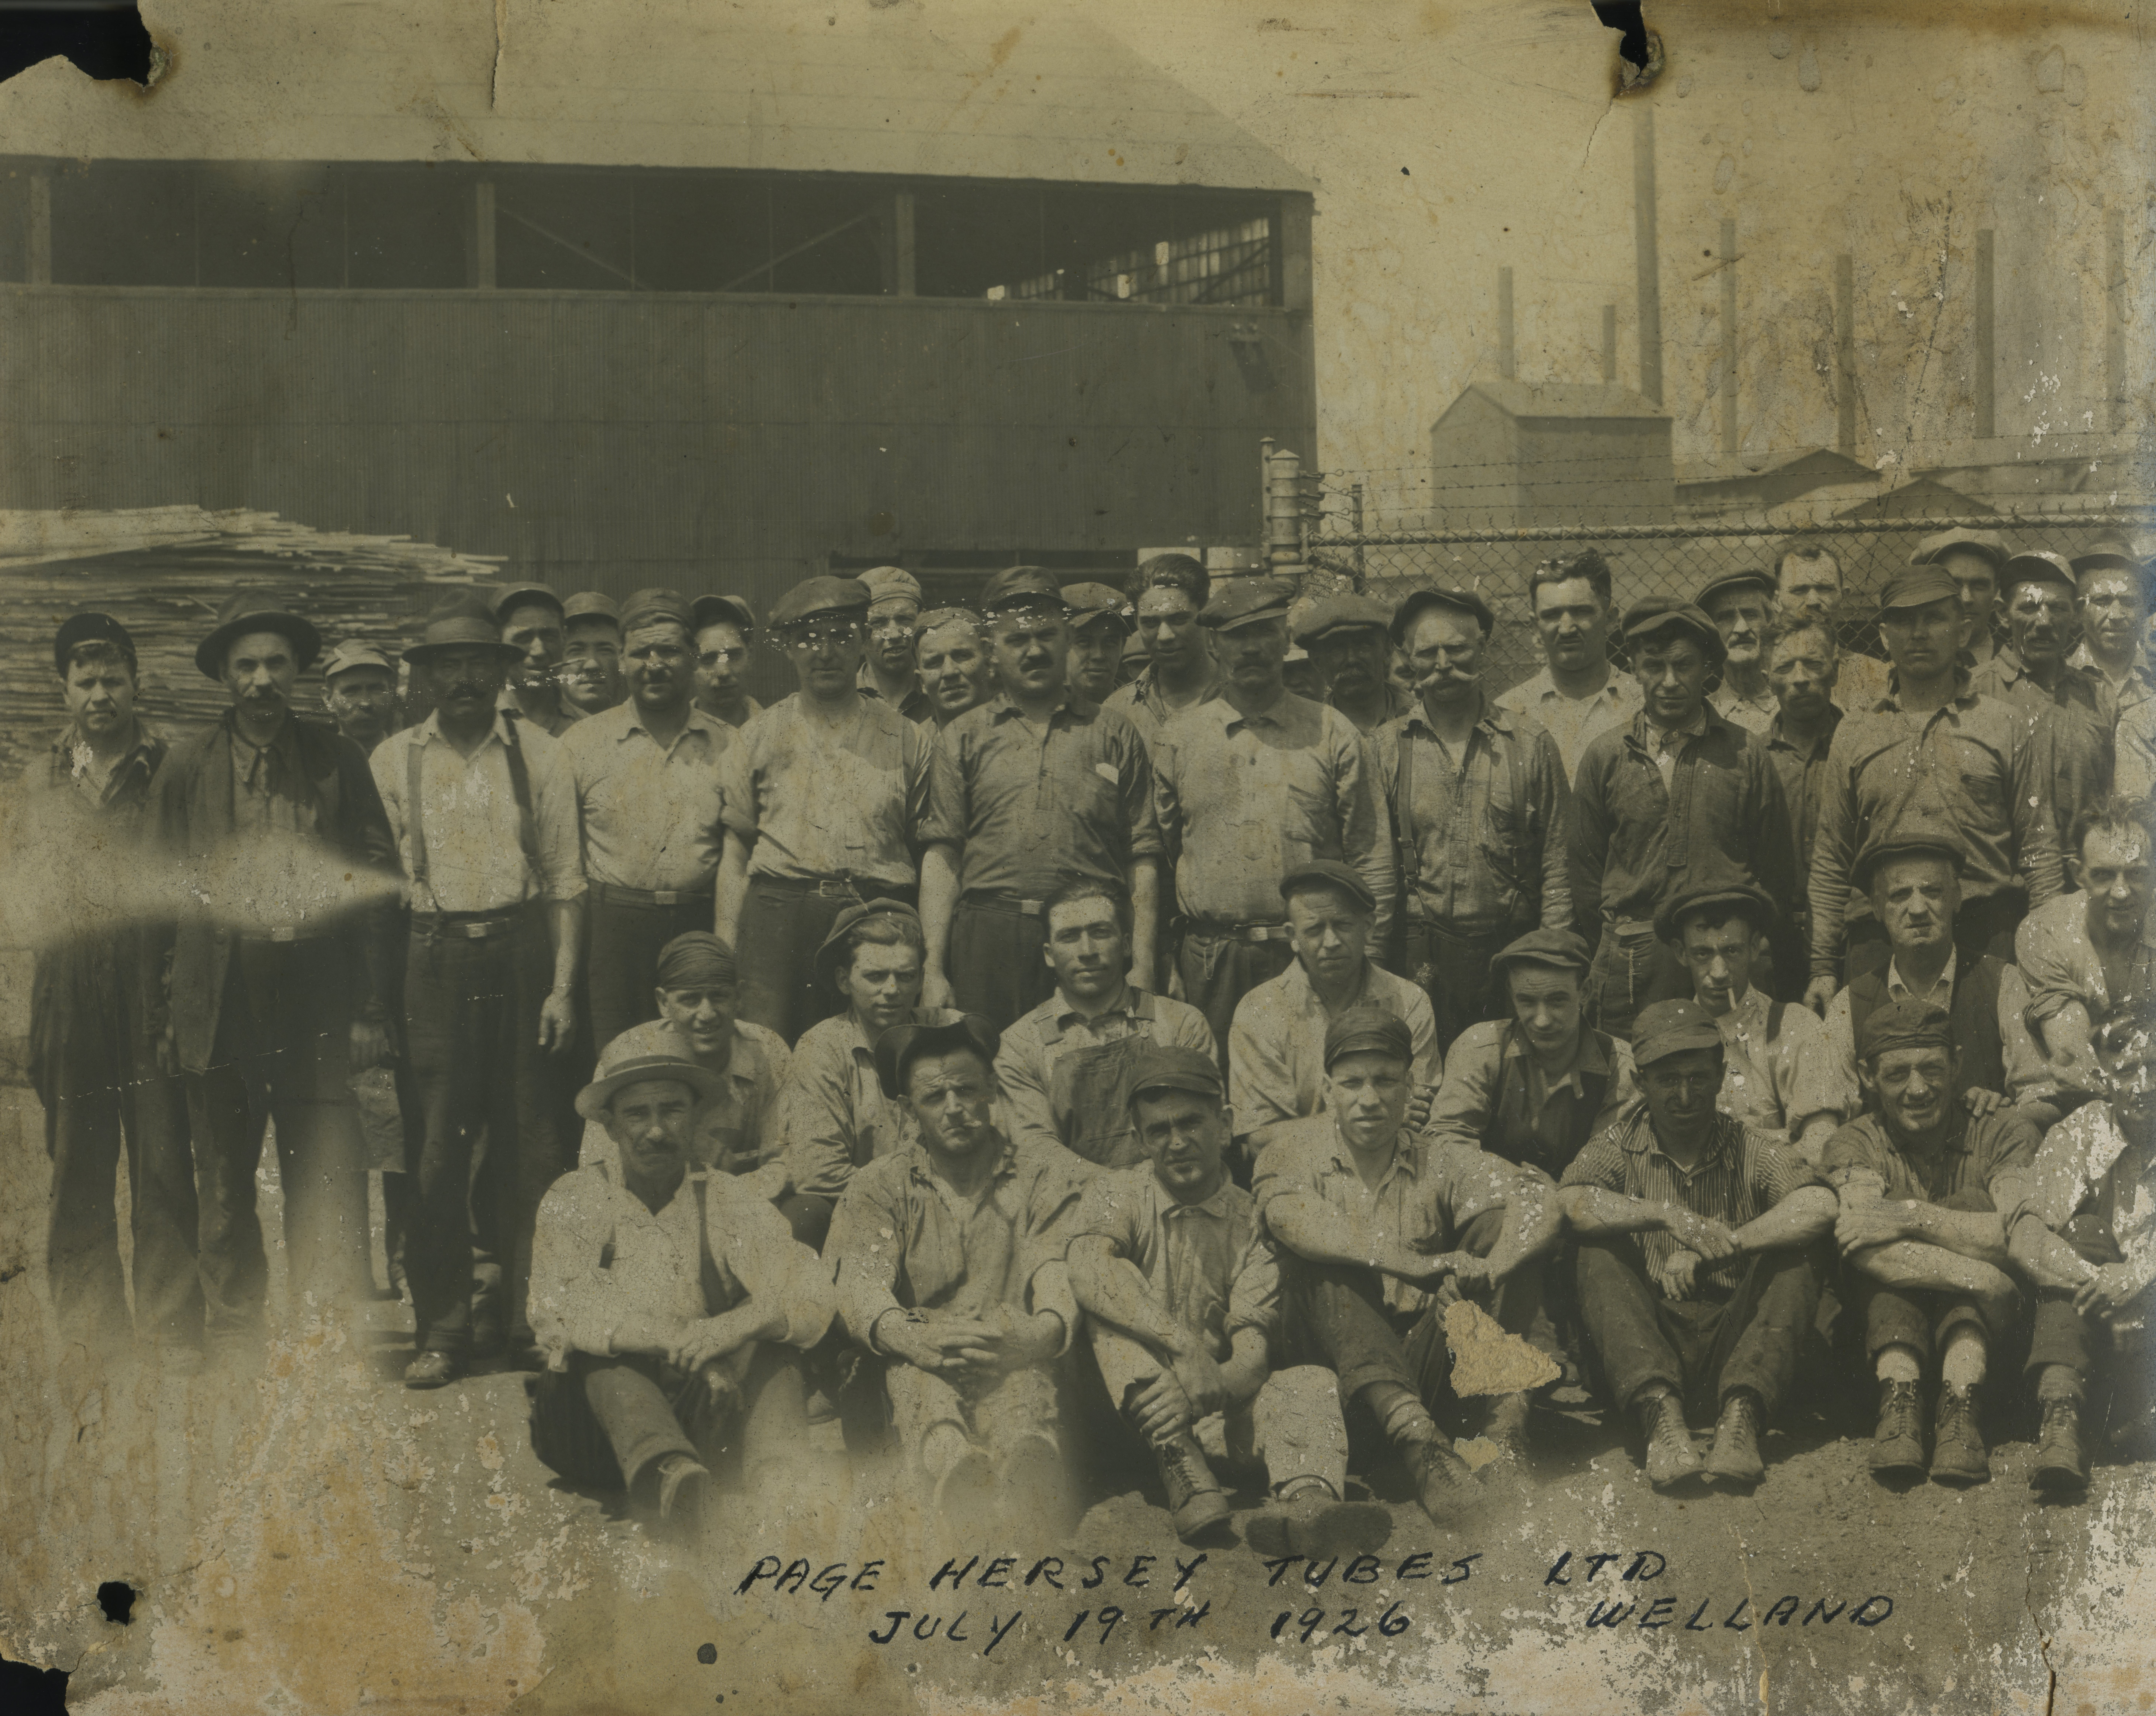 A very old photo of several rows of men posing for a photo, in front of what looks to be a factory or plant.